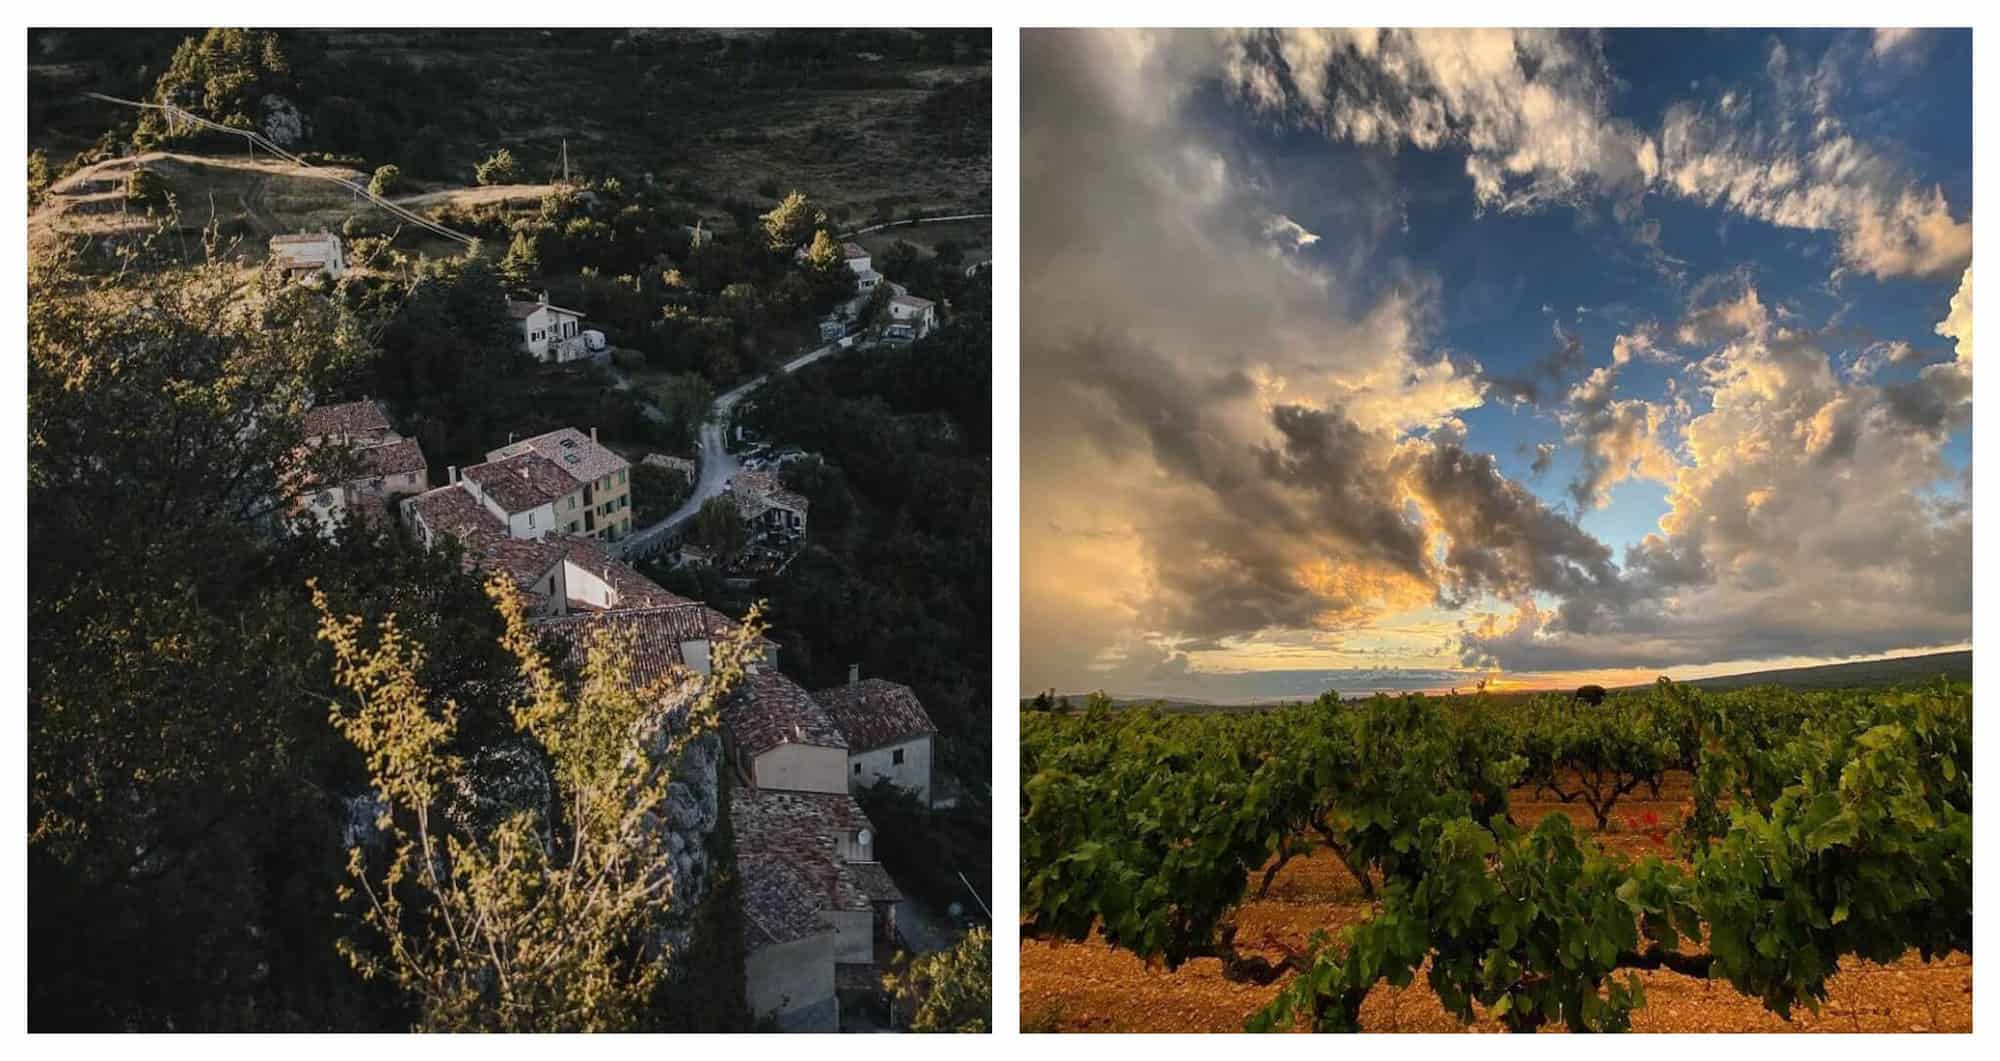 Left: a view of a hidden hilltop village of Provence from above. There are several buildings and greenery. Right: A vineyard with a sunset. The sky is blue with orange, yellow, and gray clouds.